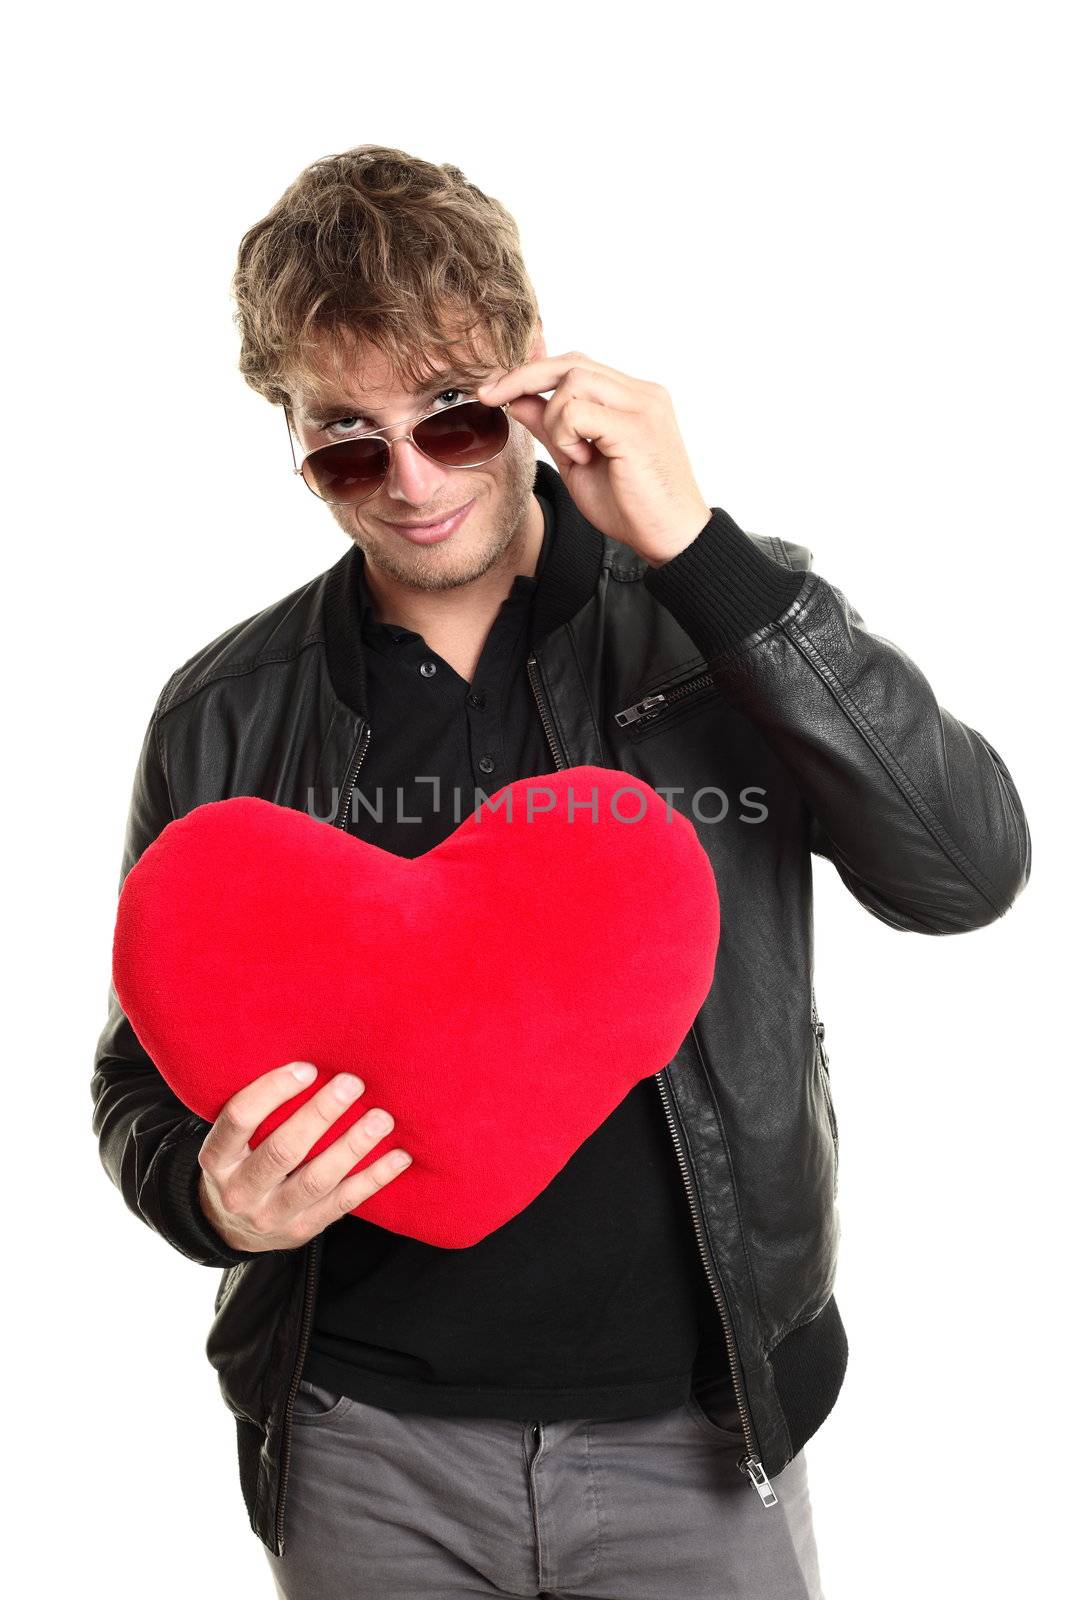 Valentines day man player holding heart looking over sunglasses. Funny image of caucasian male in leather jacket isolated on white background.